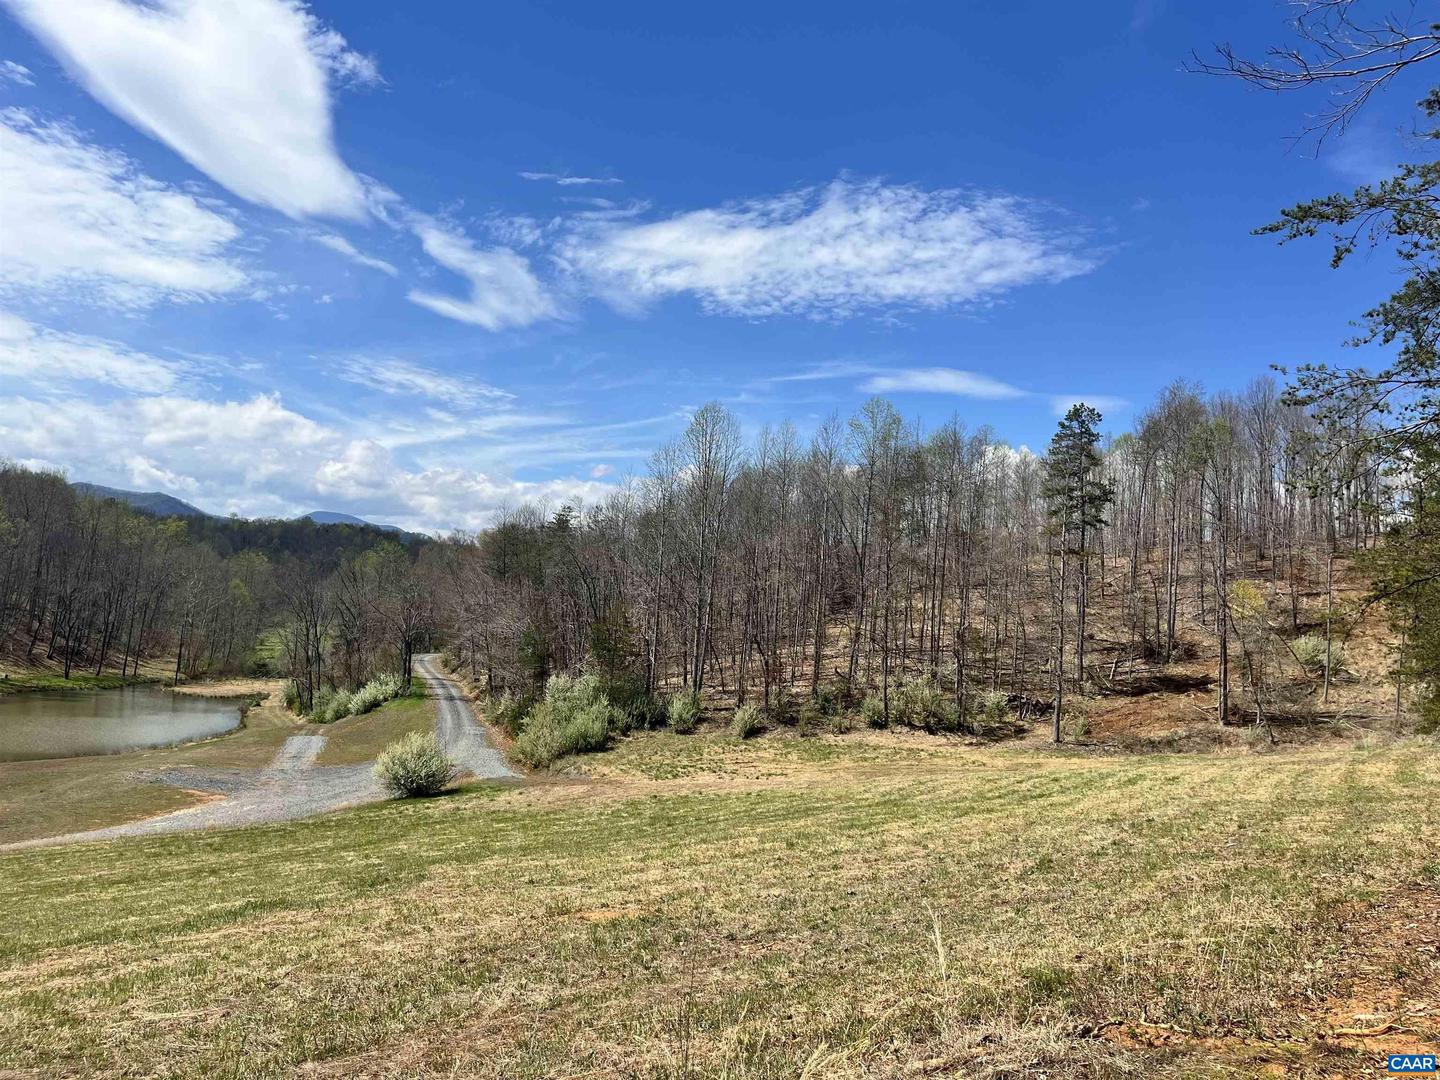 0 WILLOW BRANCH LN #1, FABER, Virginia 22938, ,Land,For sale,0 WILLOW BRANCH LN #1,649235 MLS # 649235